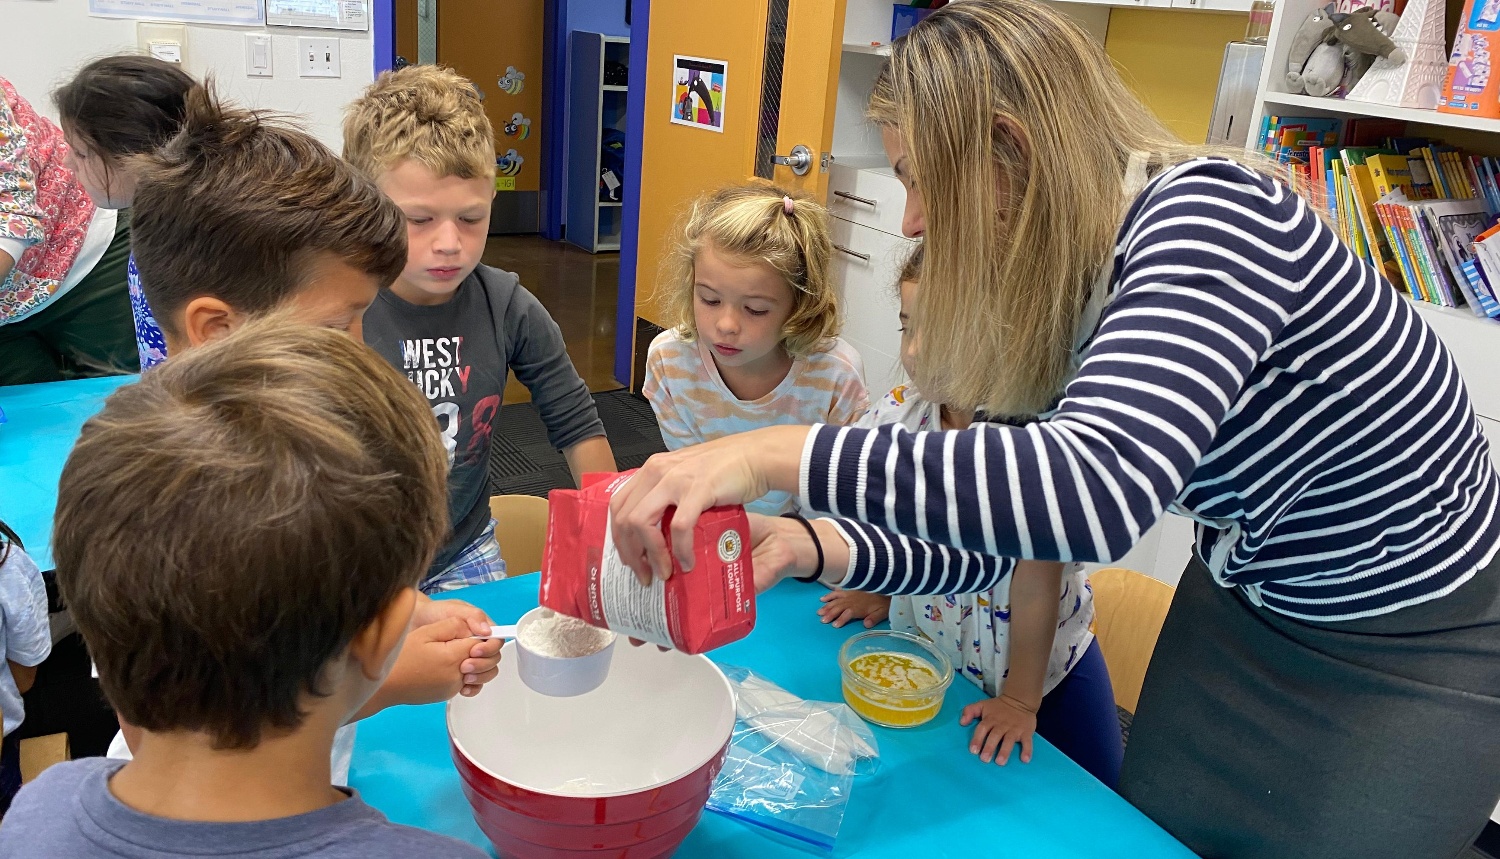 Students learning about measurements with flour while baking.